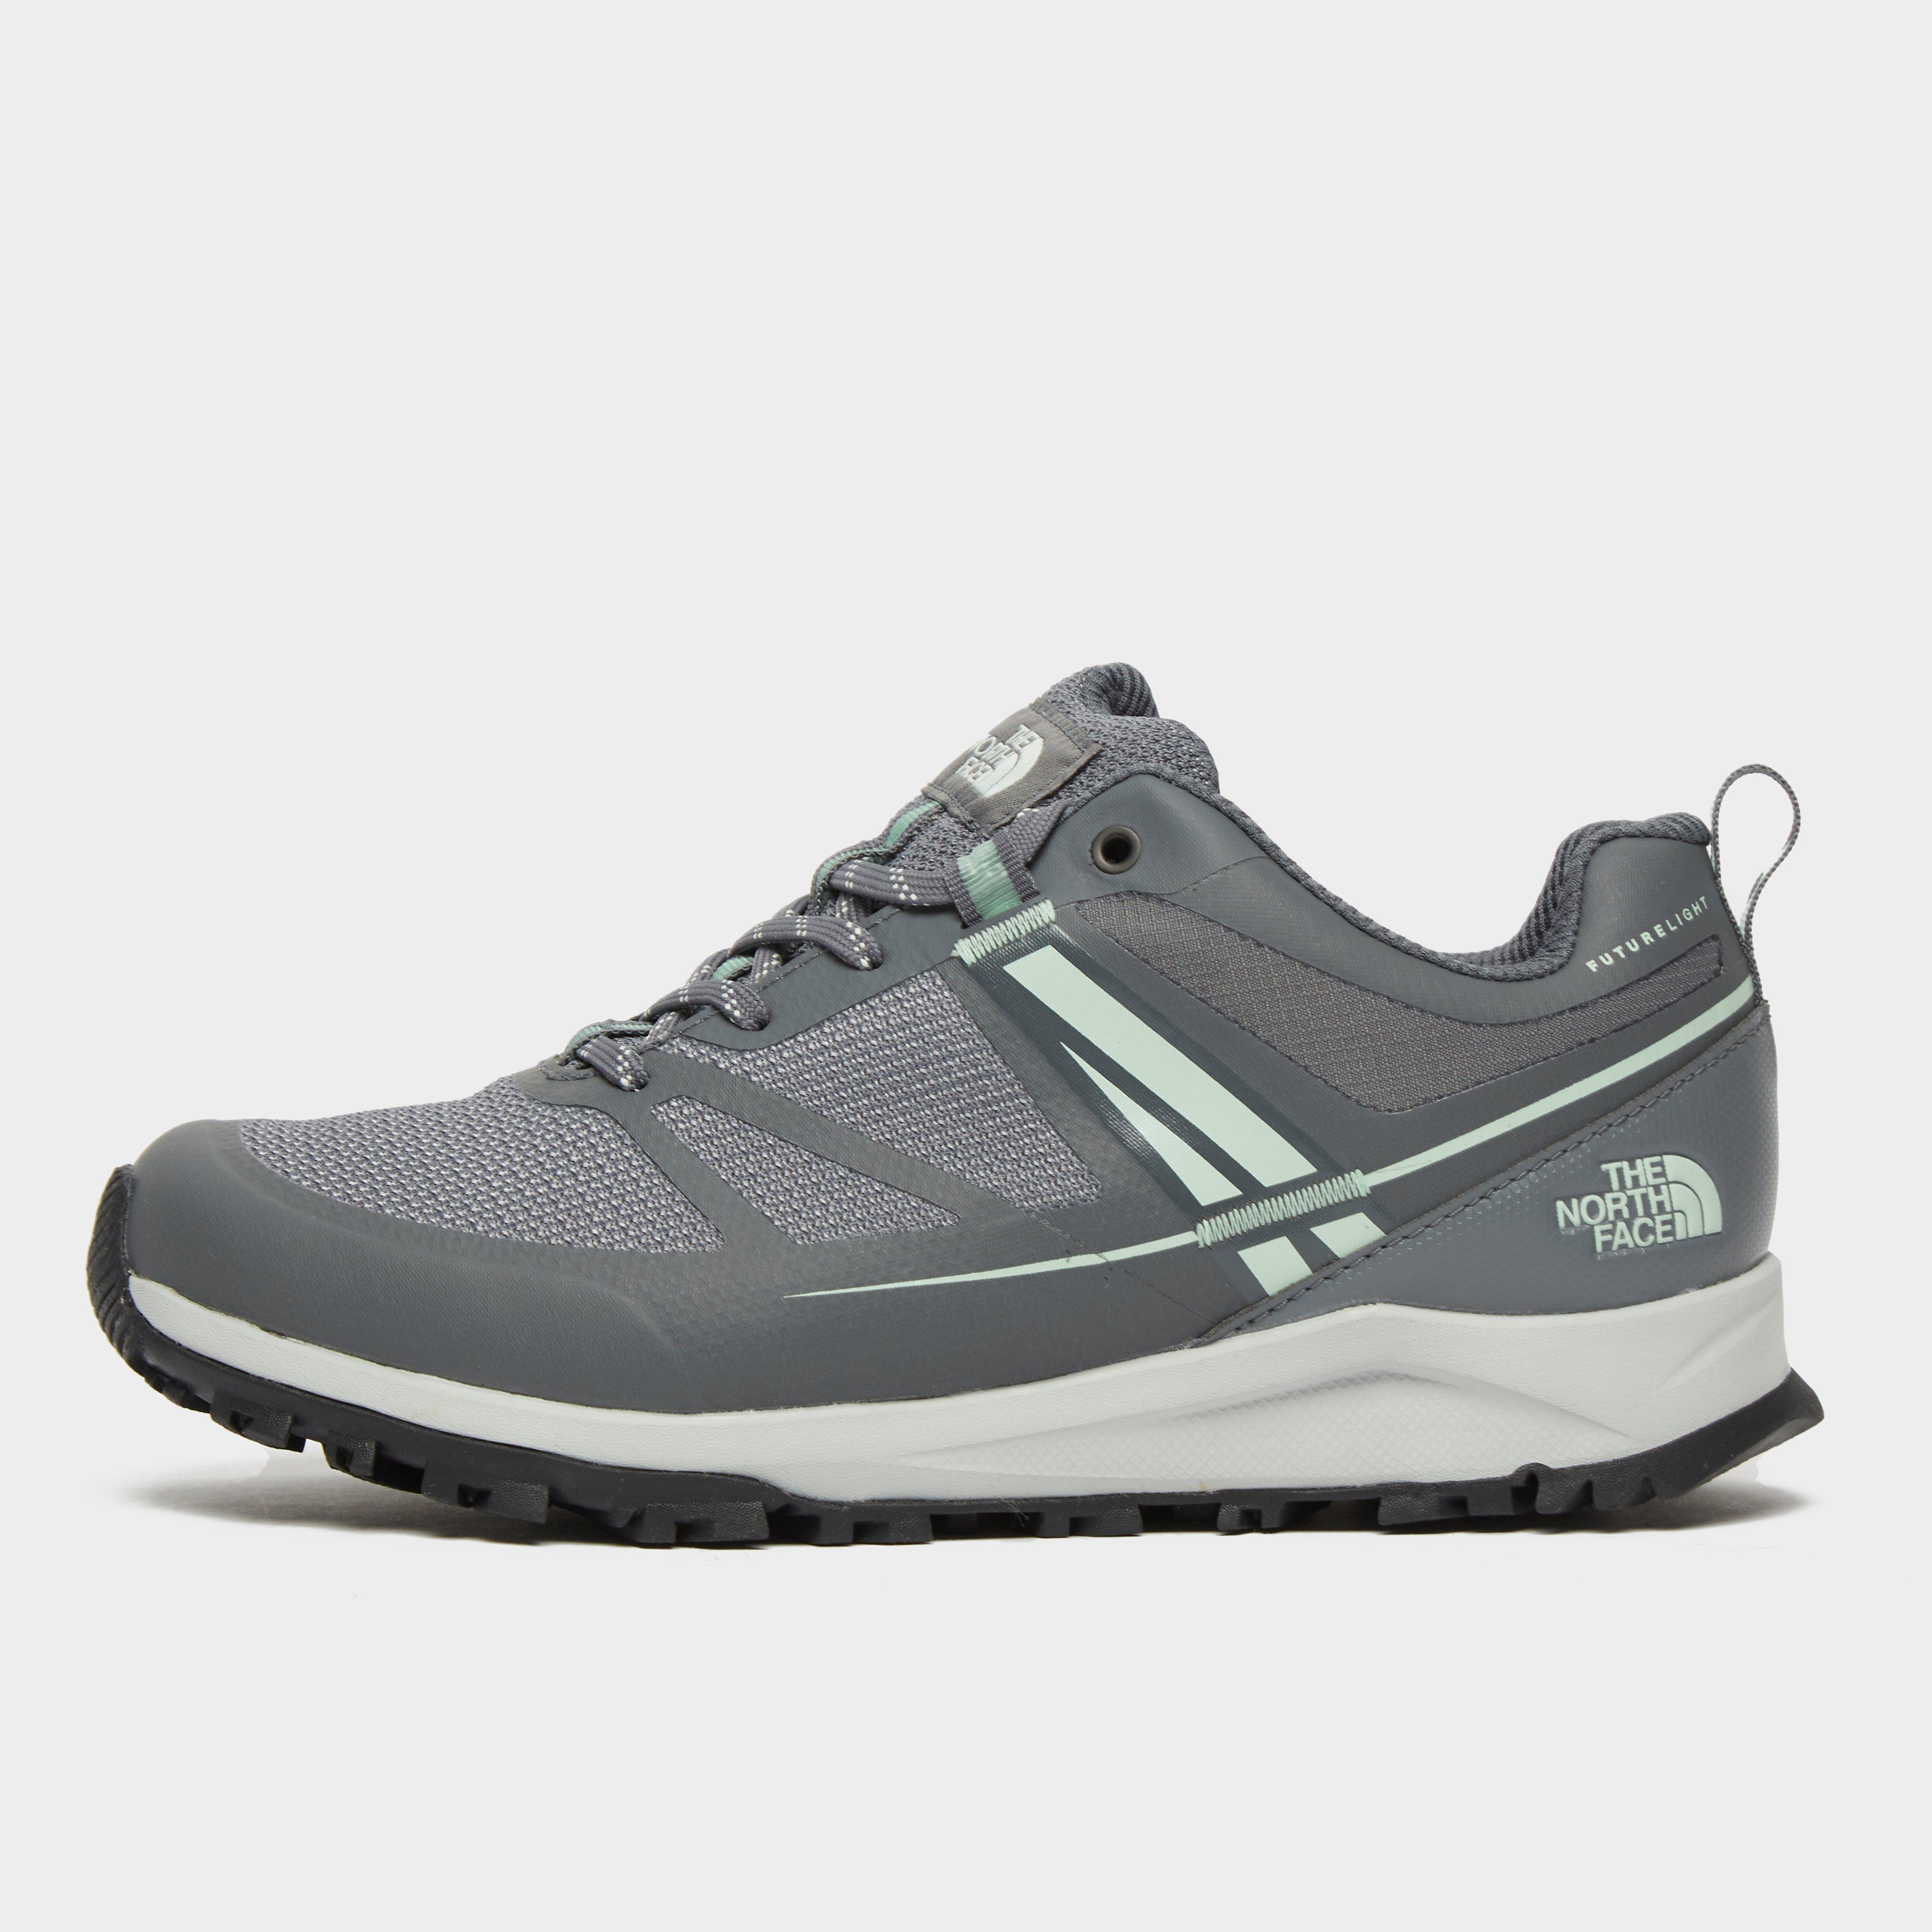 The North Face Womens Litewave Futurelighttm Trail Running Shoe - Grey/gry  Grey/gry